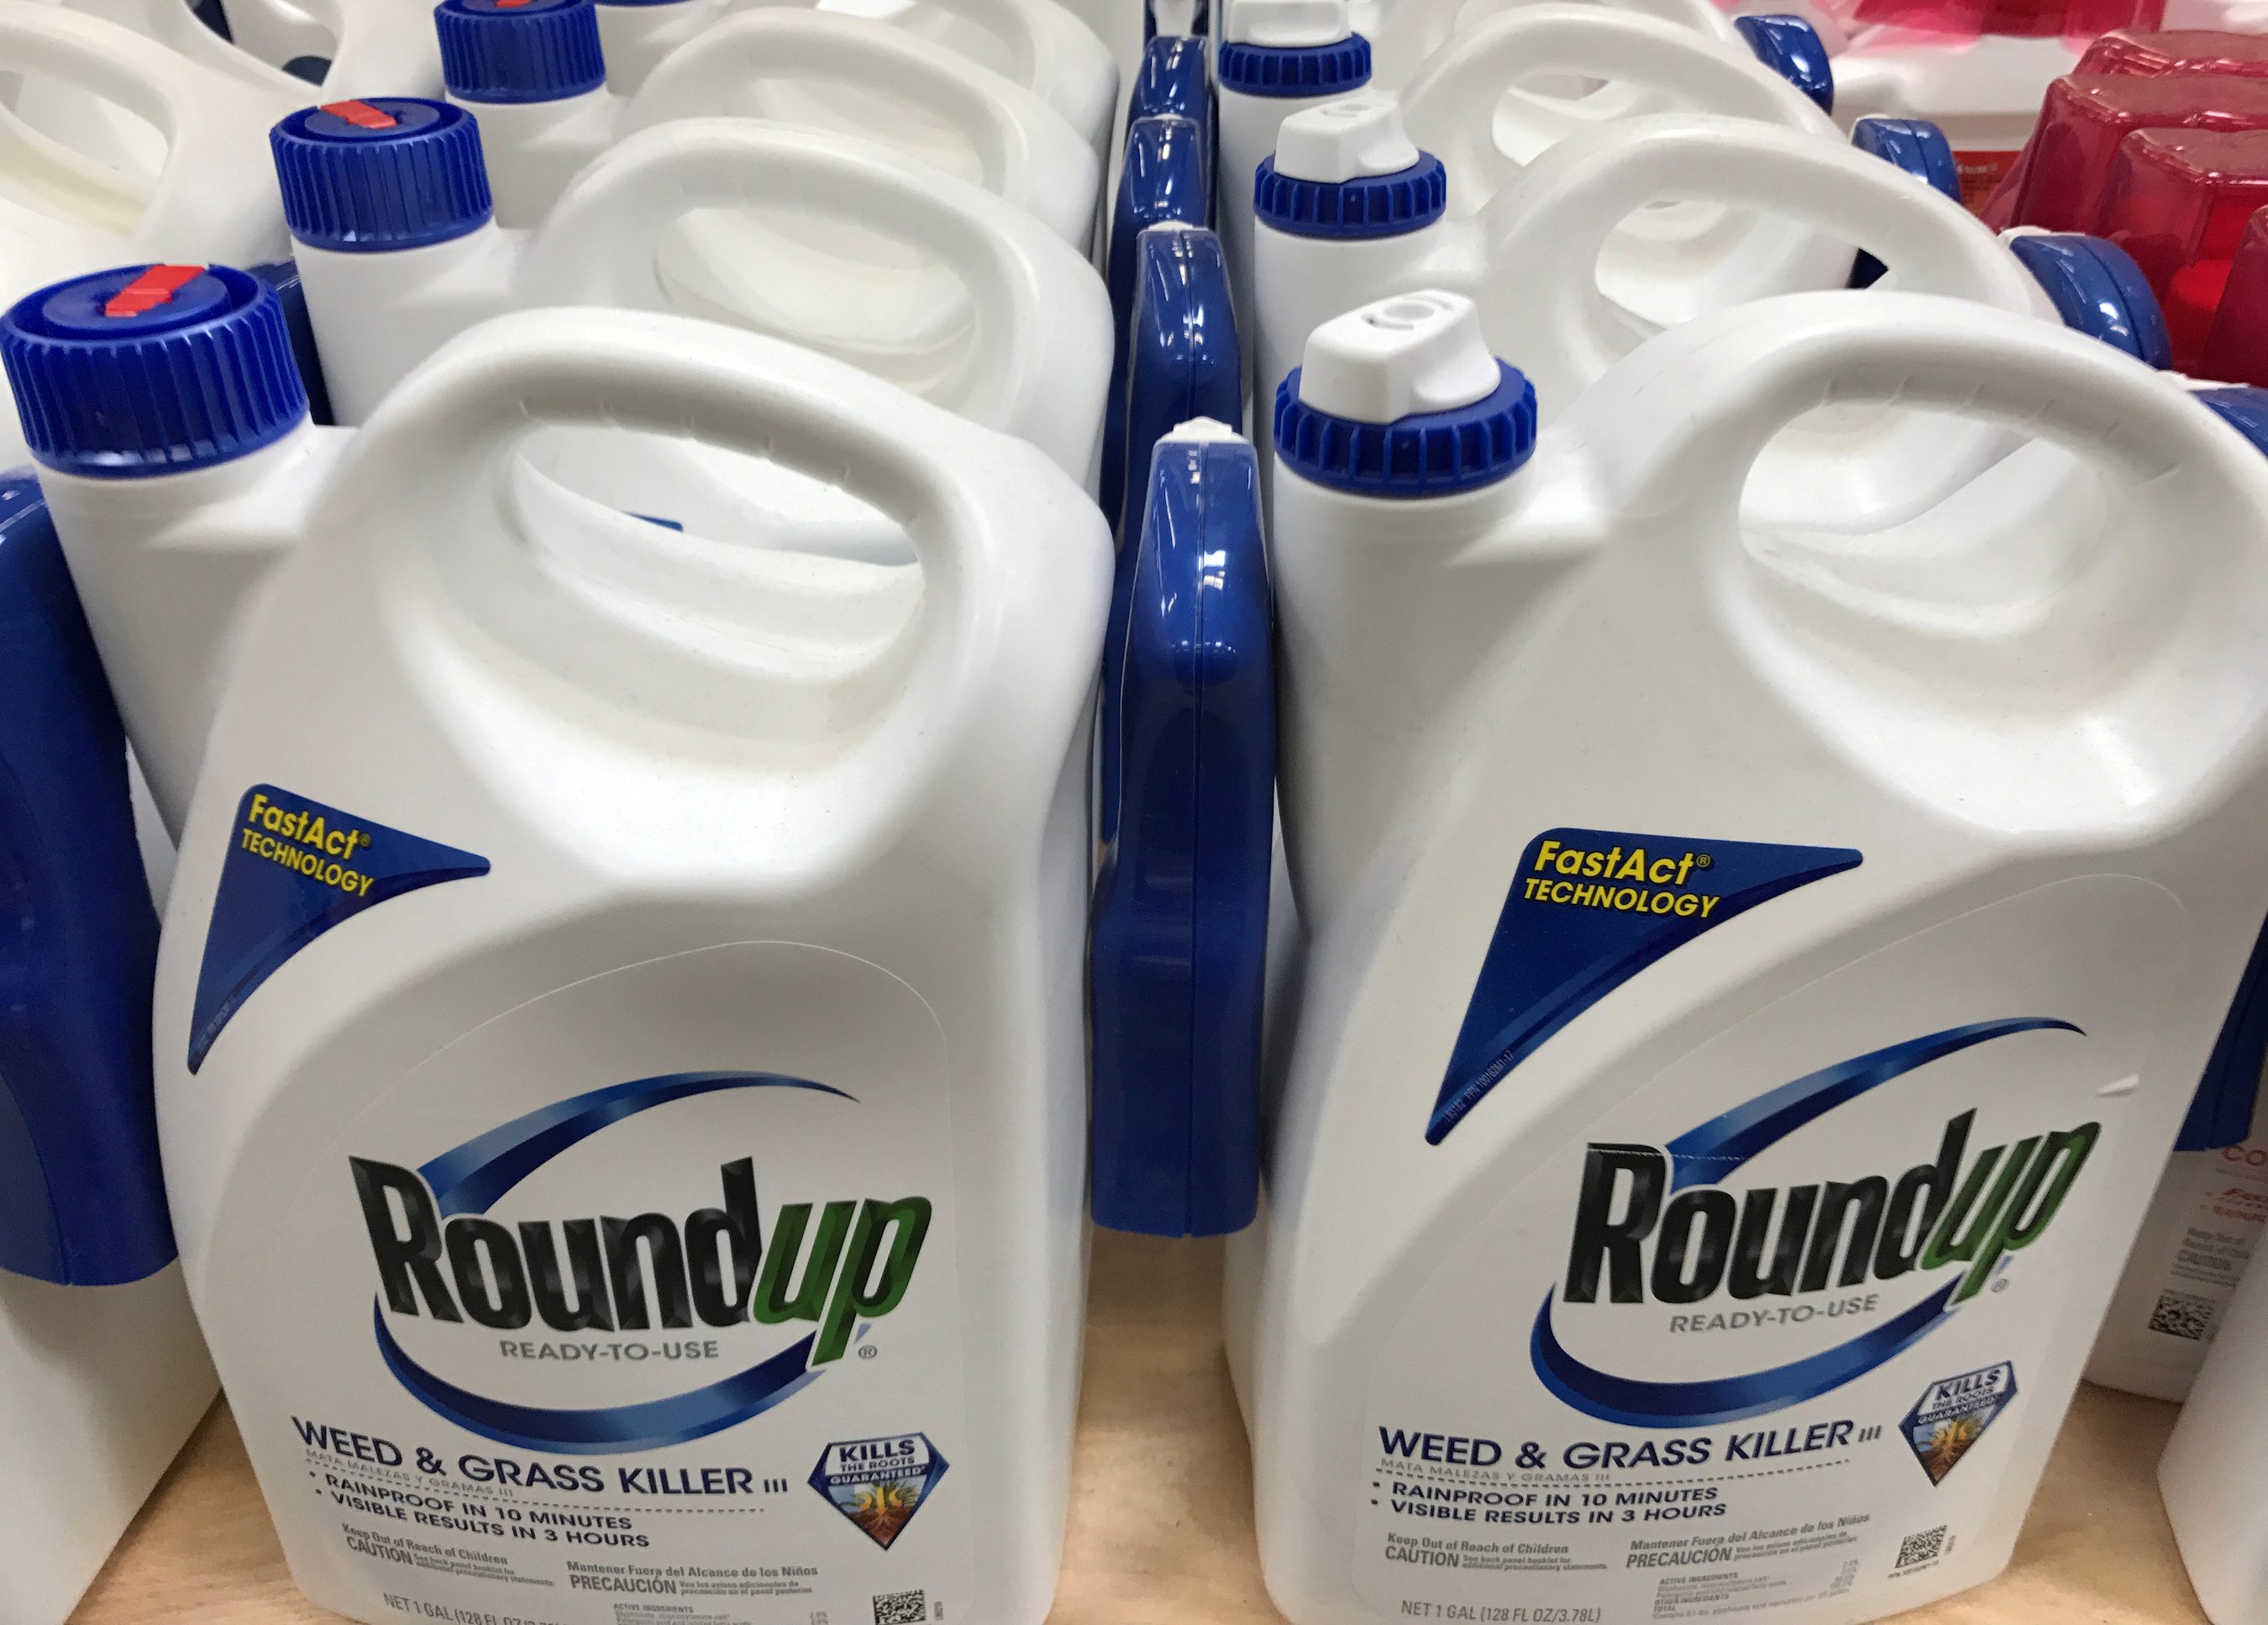 Bayer reaches $2-billion deal over future Roundup cancer claims